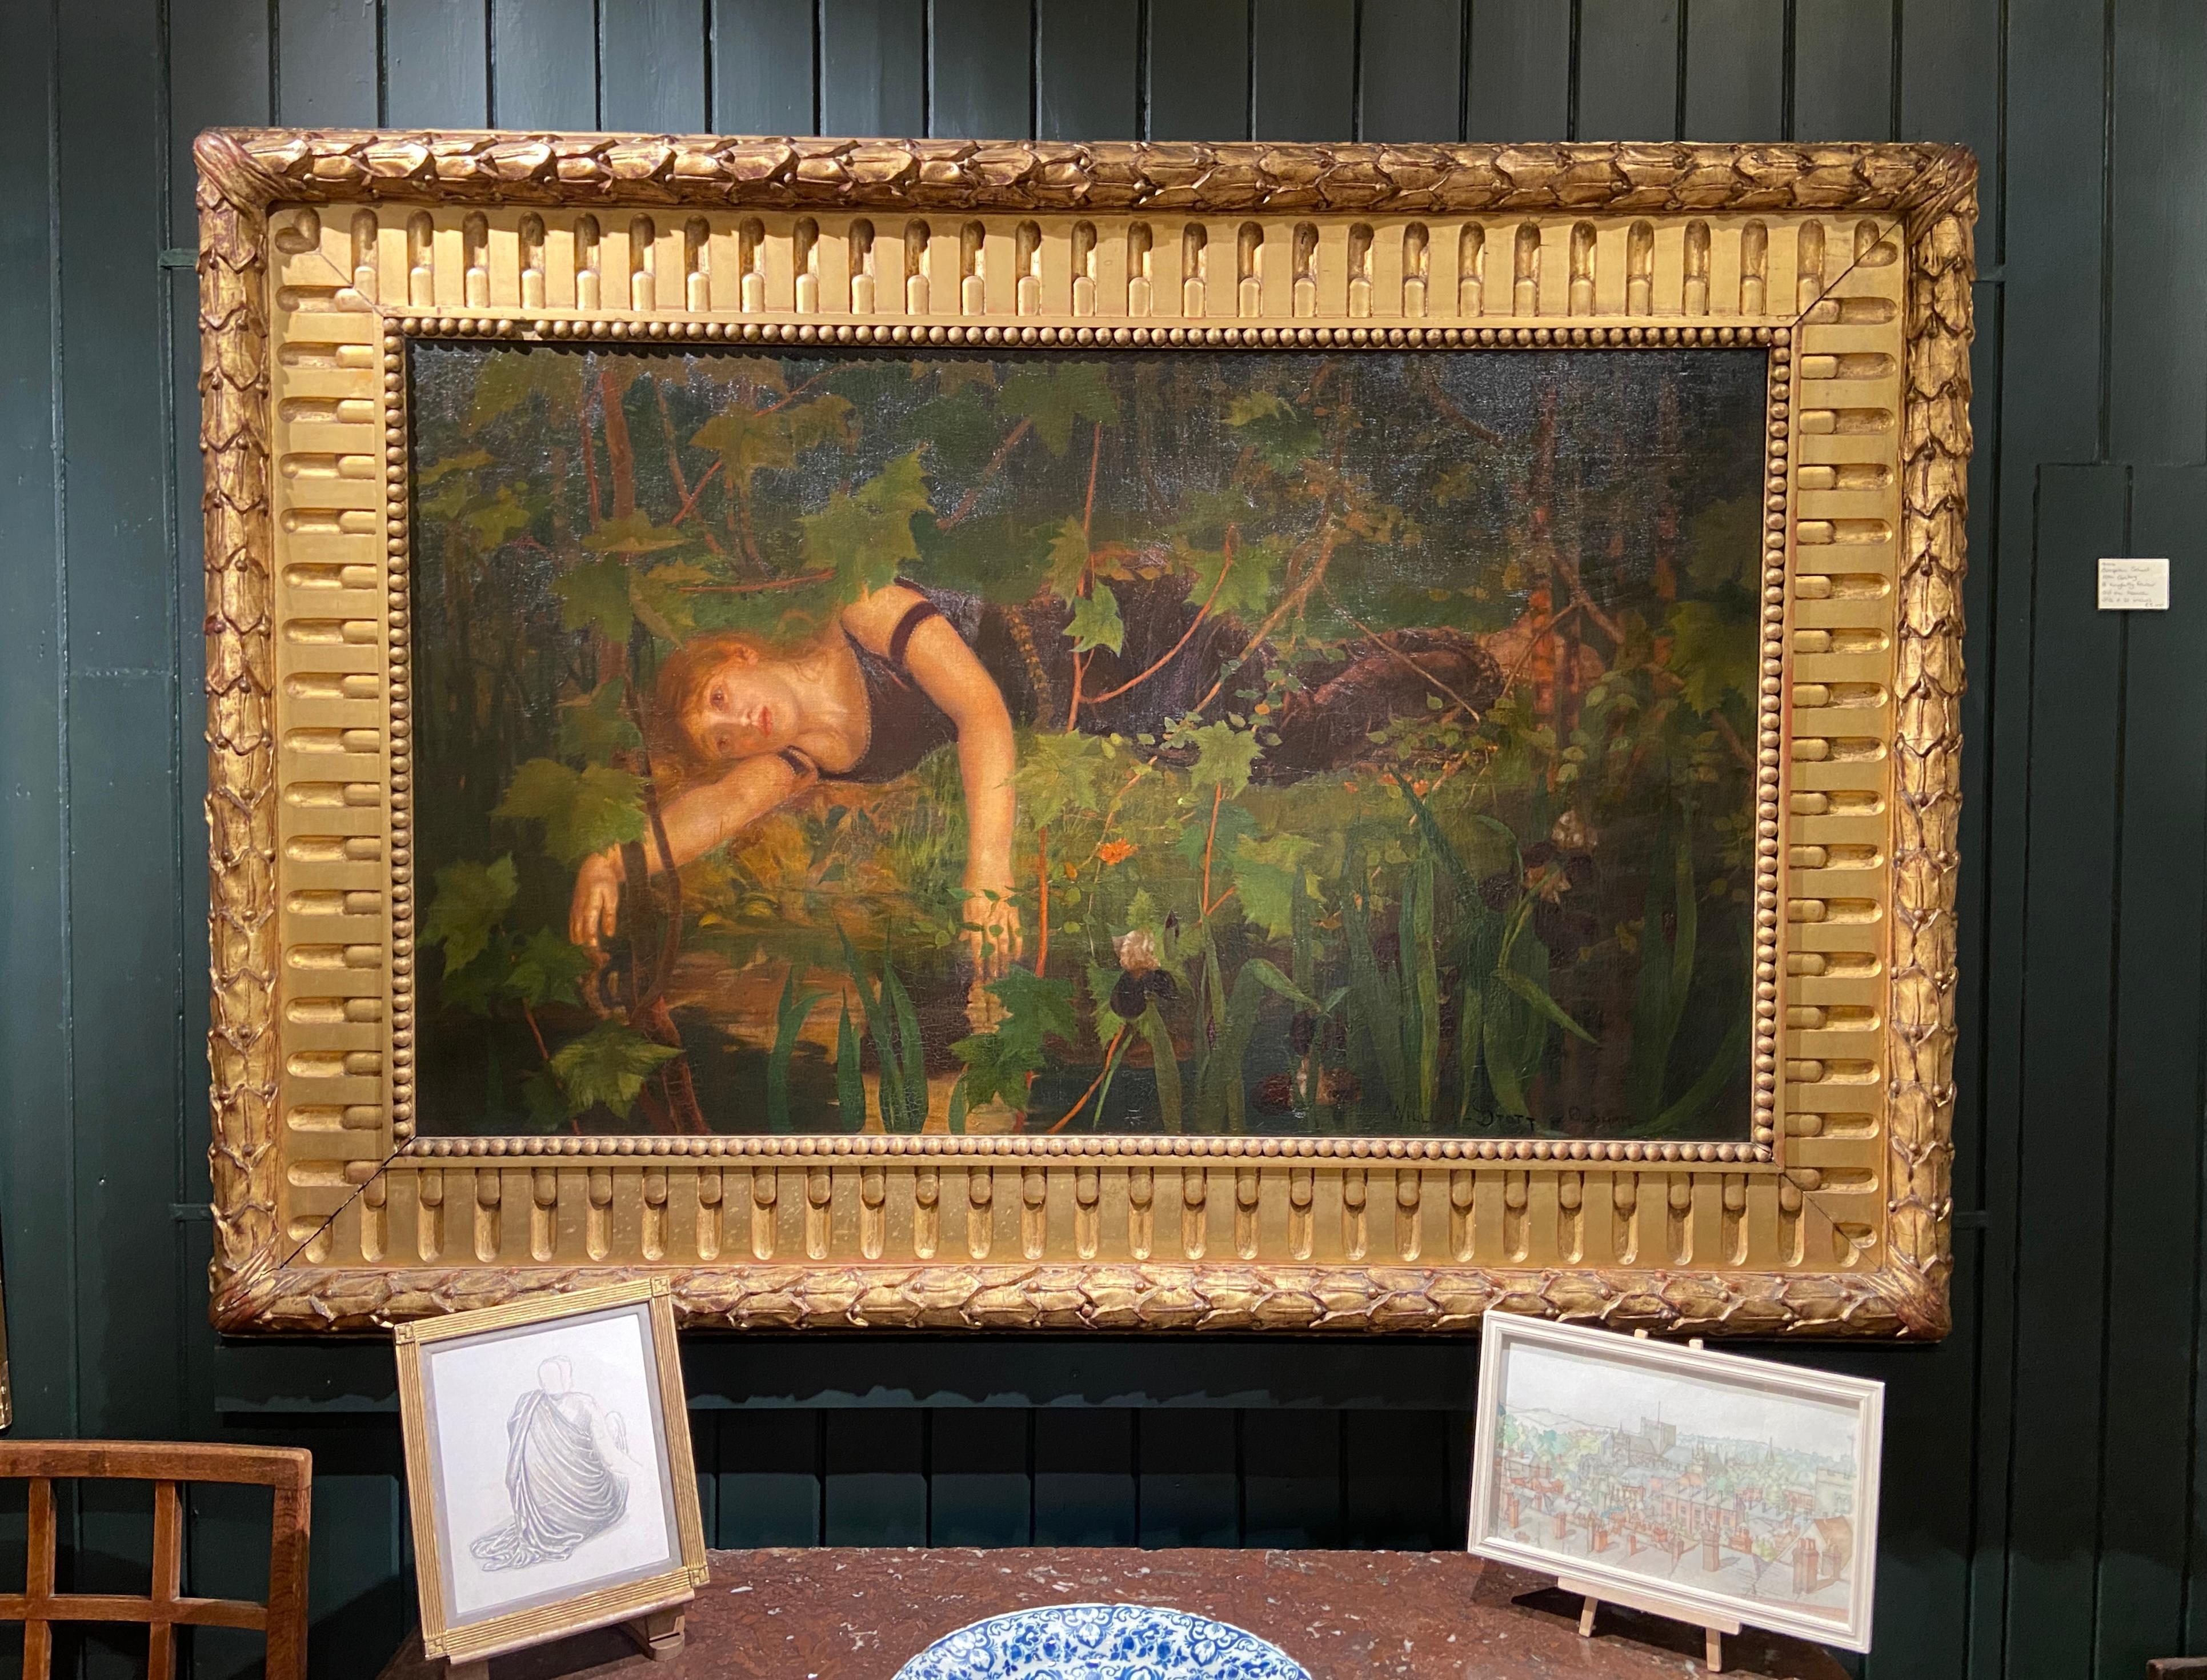 Oil on canvas, signed lower right
Image size: 33 1/2 x 56 1/2 inches (85 x 143 cm)
Original gilt frame




Provenance
With the artist's son, Millie Dow Stott Esq., until 1912.
Artist's Studio Sale, Christies, November 1913.
Private